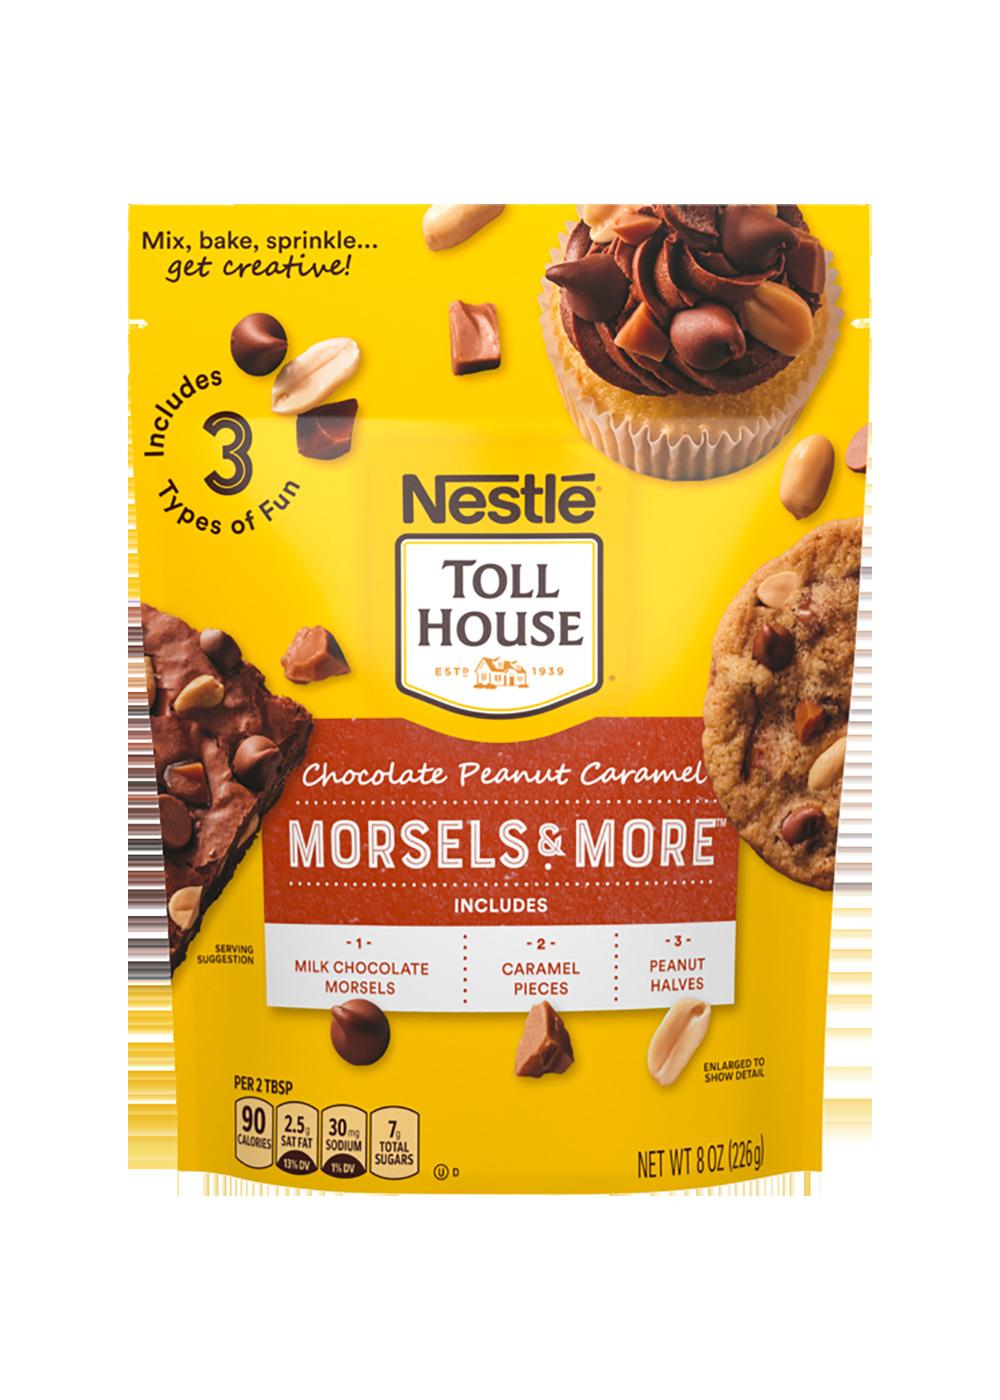 Nestle Toll House Chocolate Peanut Caramel Morsels & More; image 1 of 2